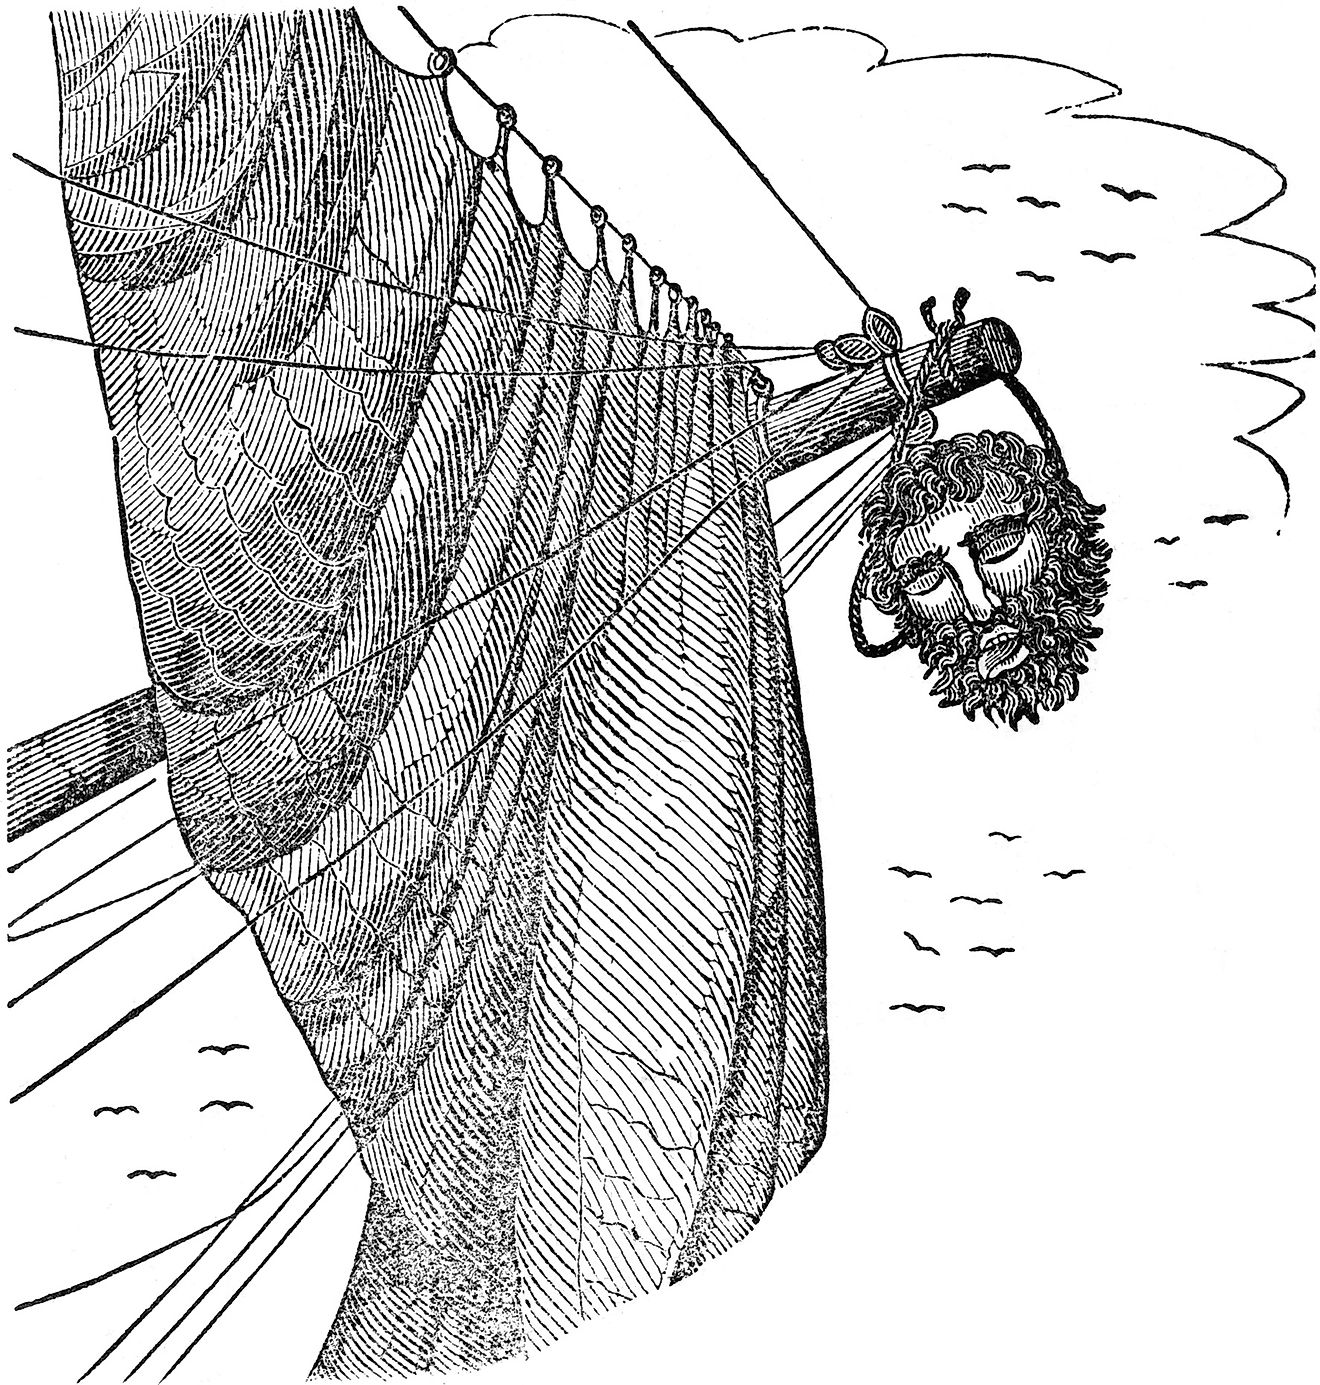 Edward Teach's severed head hangs from Maynard's bowsprit, as pictured in Charles Elles's The Pirates Own Book (1837).